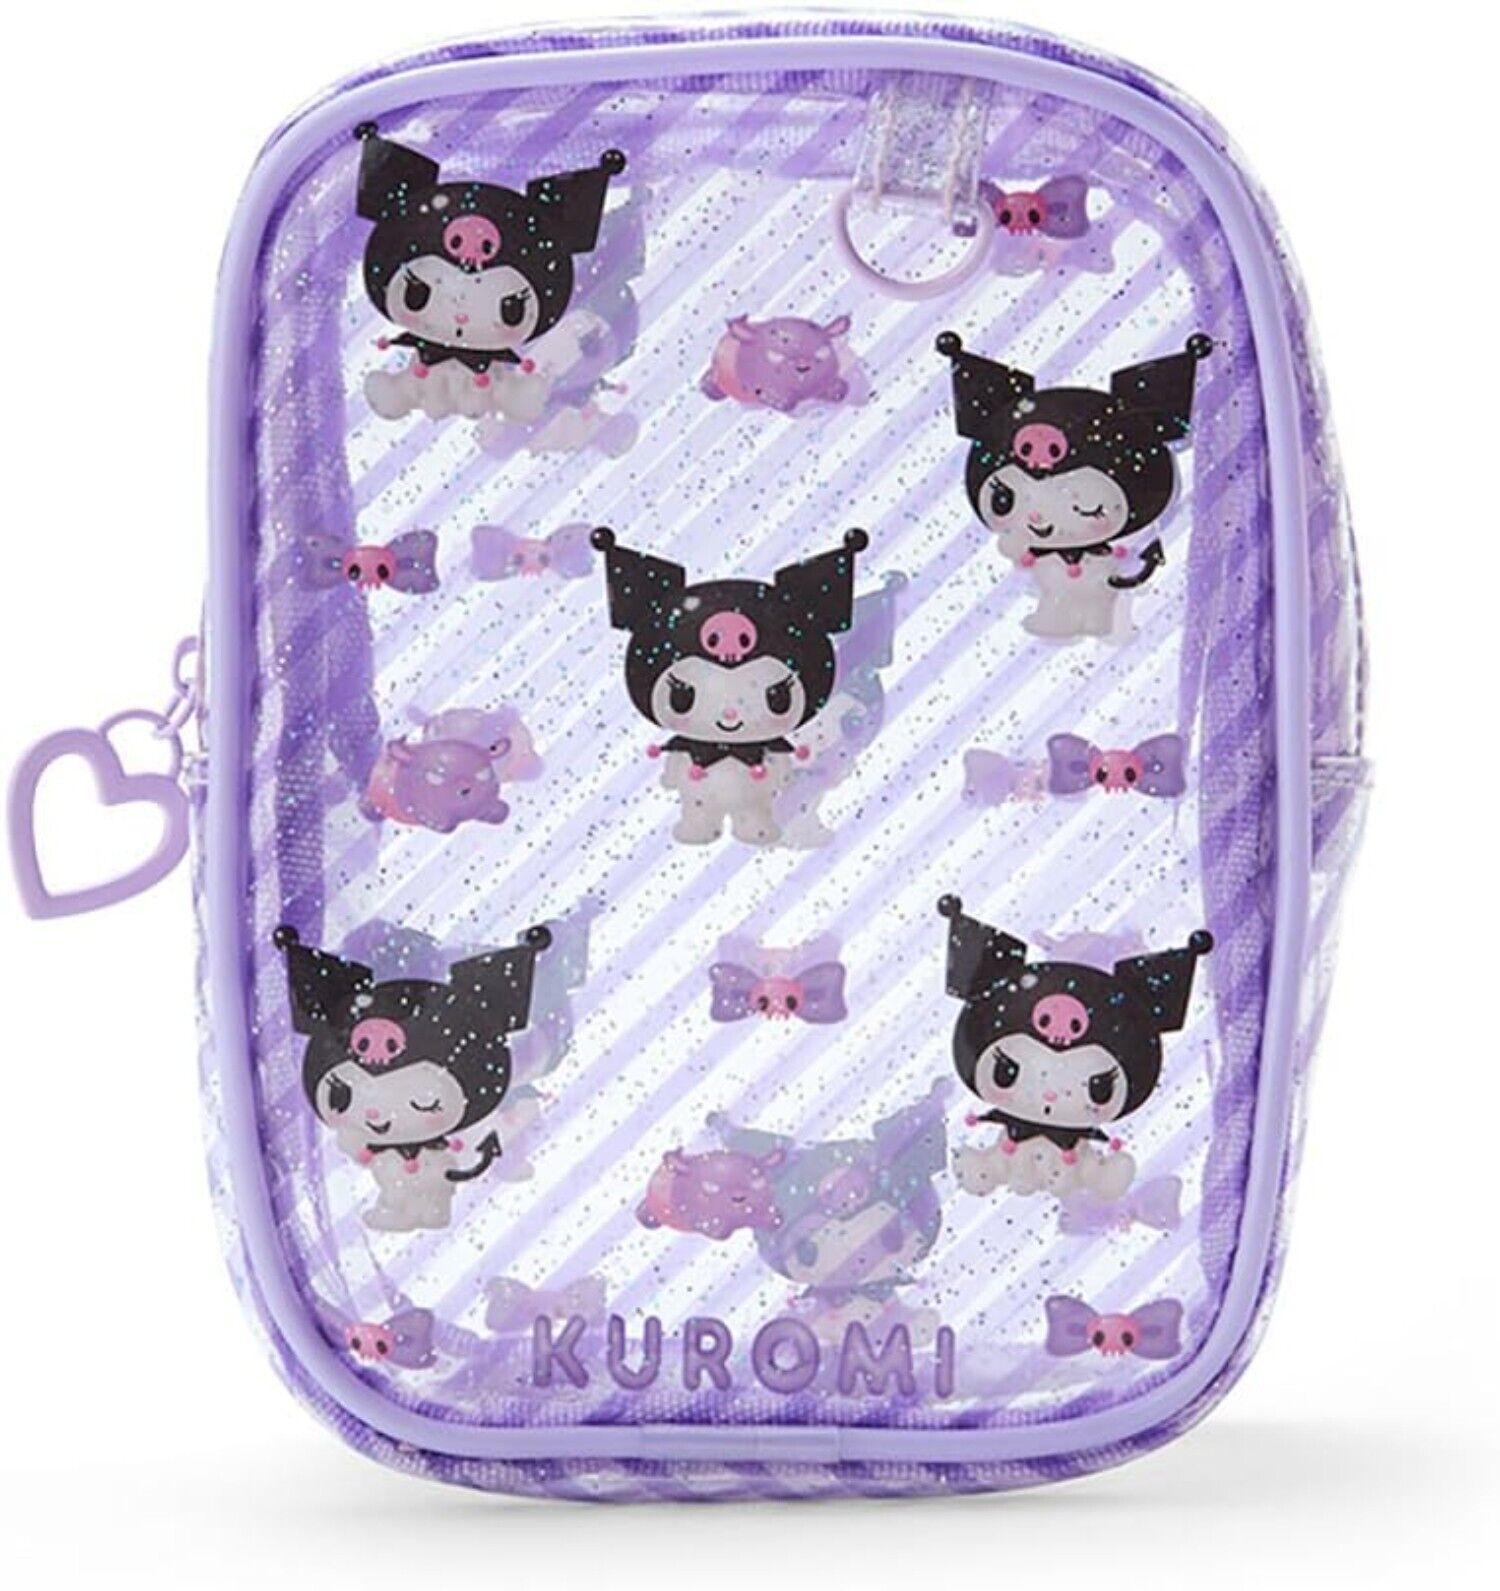 Sanrio Character Kuromi Clear Pouch (Clear & Plump 3D) Storage Case New Japan